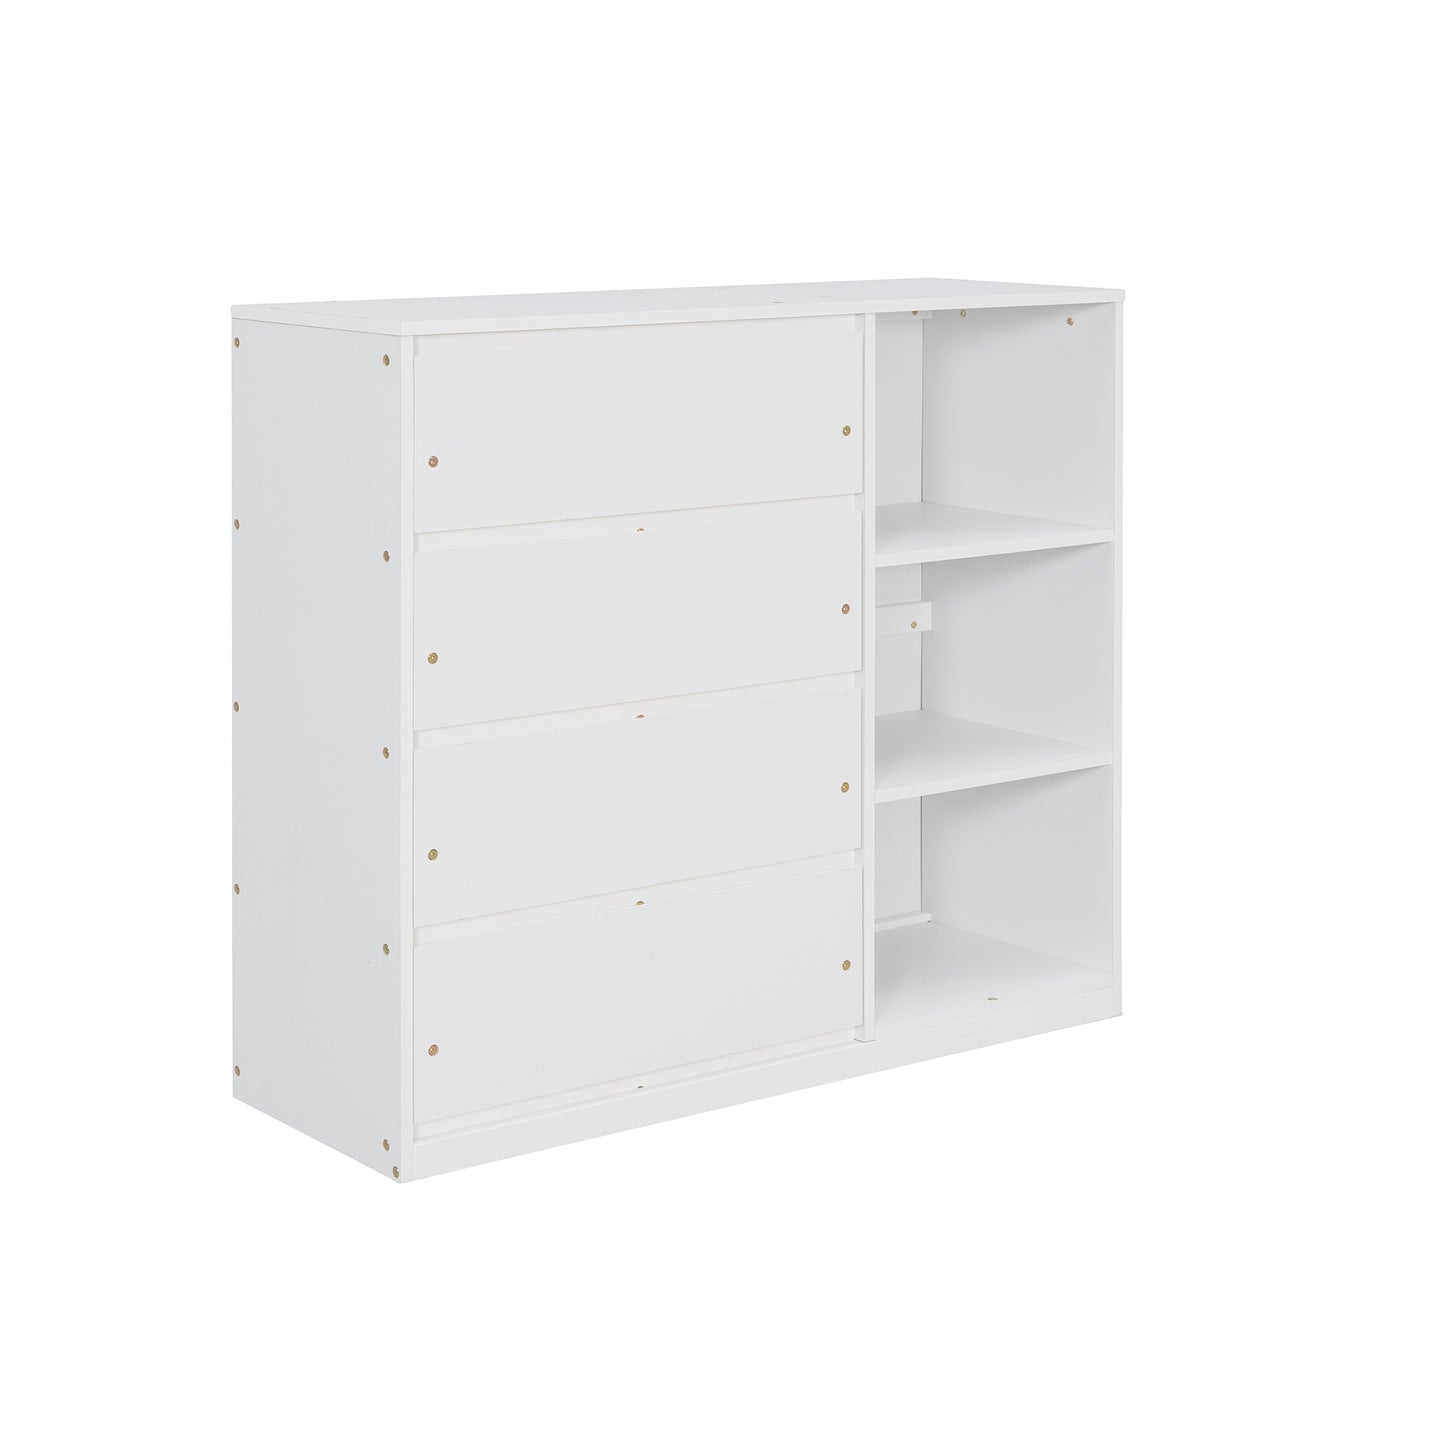 White Twin Bunk Bed with Storage Drawers and Shelves - Space-Saving Twin Bunk Bed